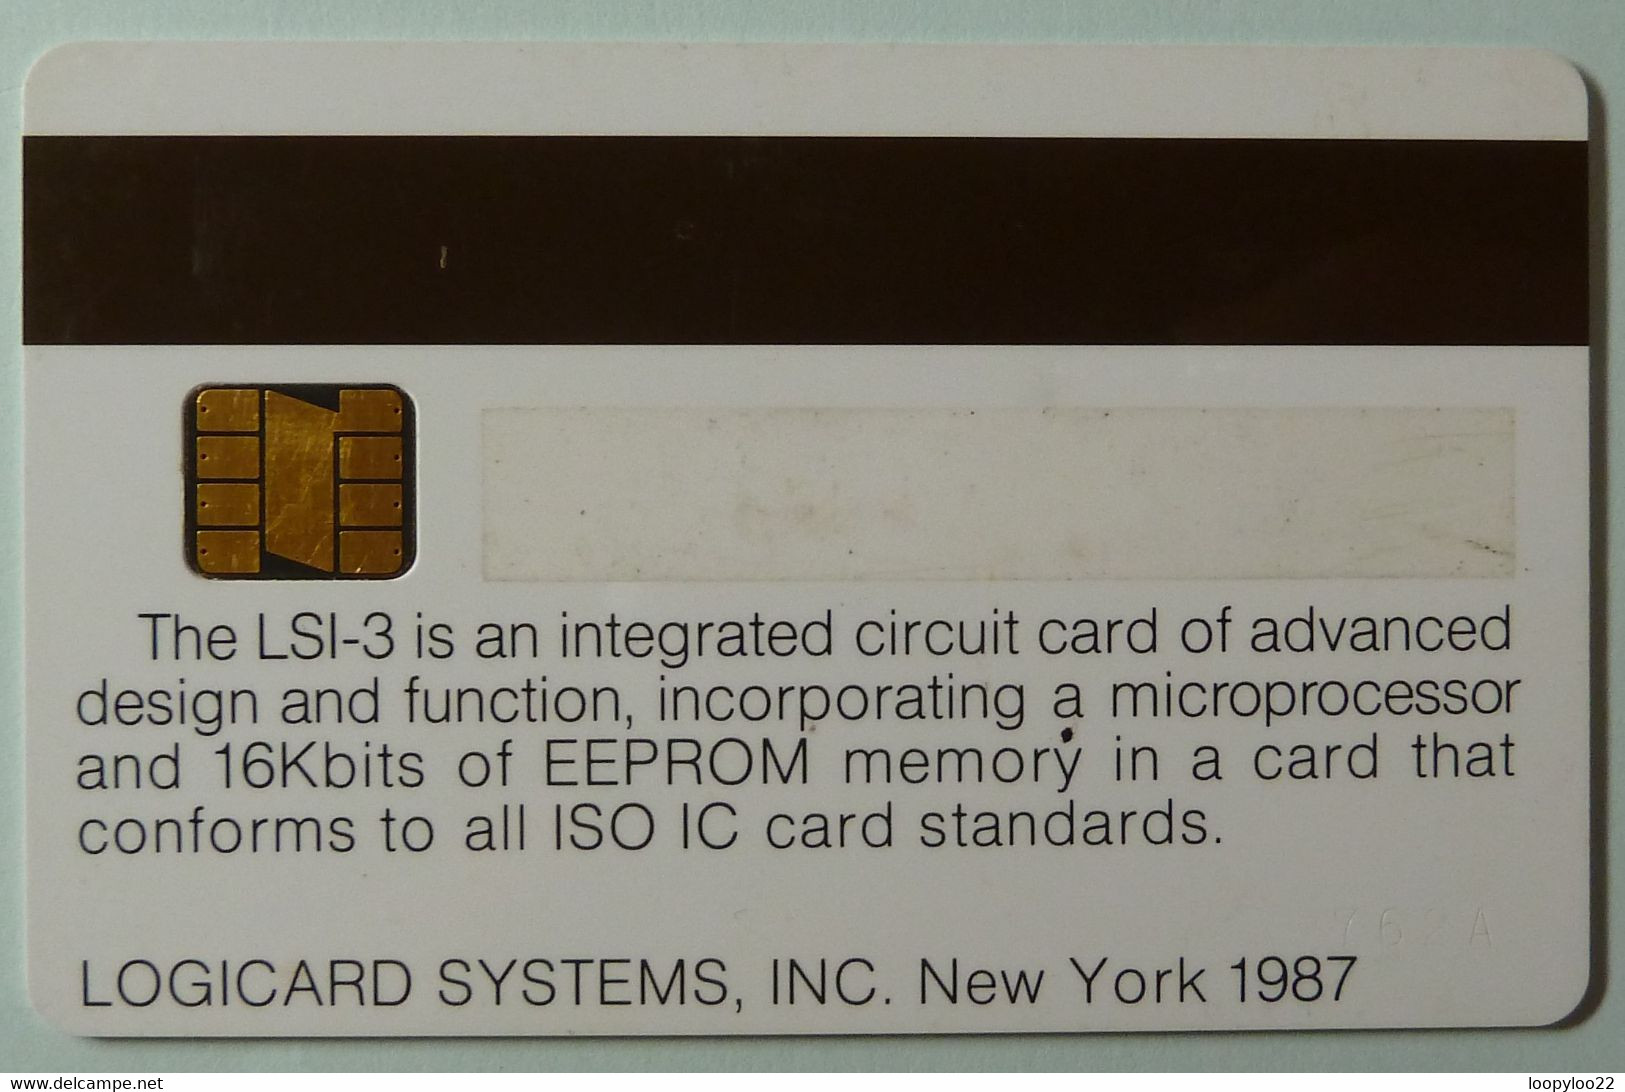 USA - Early Smart Card Demo - 1987 - LSI-3 - With Chip - RRR - [2] Chipkarten